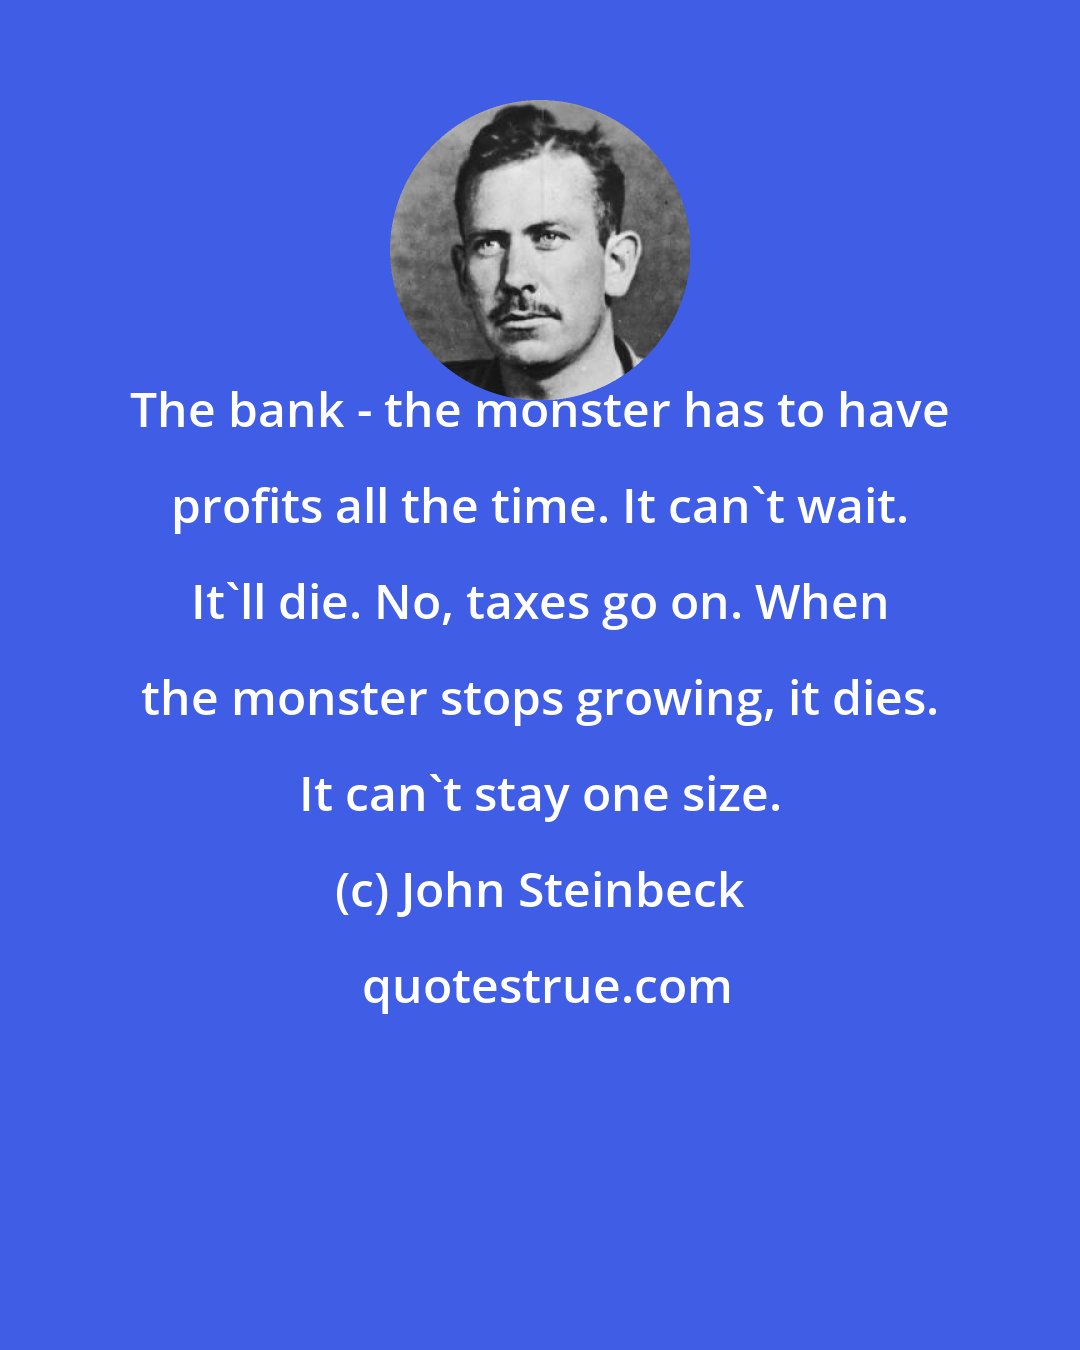 John Steinbeck: The bank - the monster has to have profits all the time. It can't wait. It'll die. No, taxes go on. When the monster stops growing, it dies. It can't stay one size.